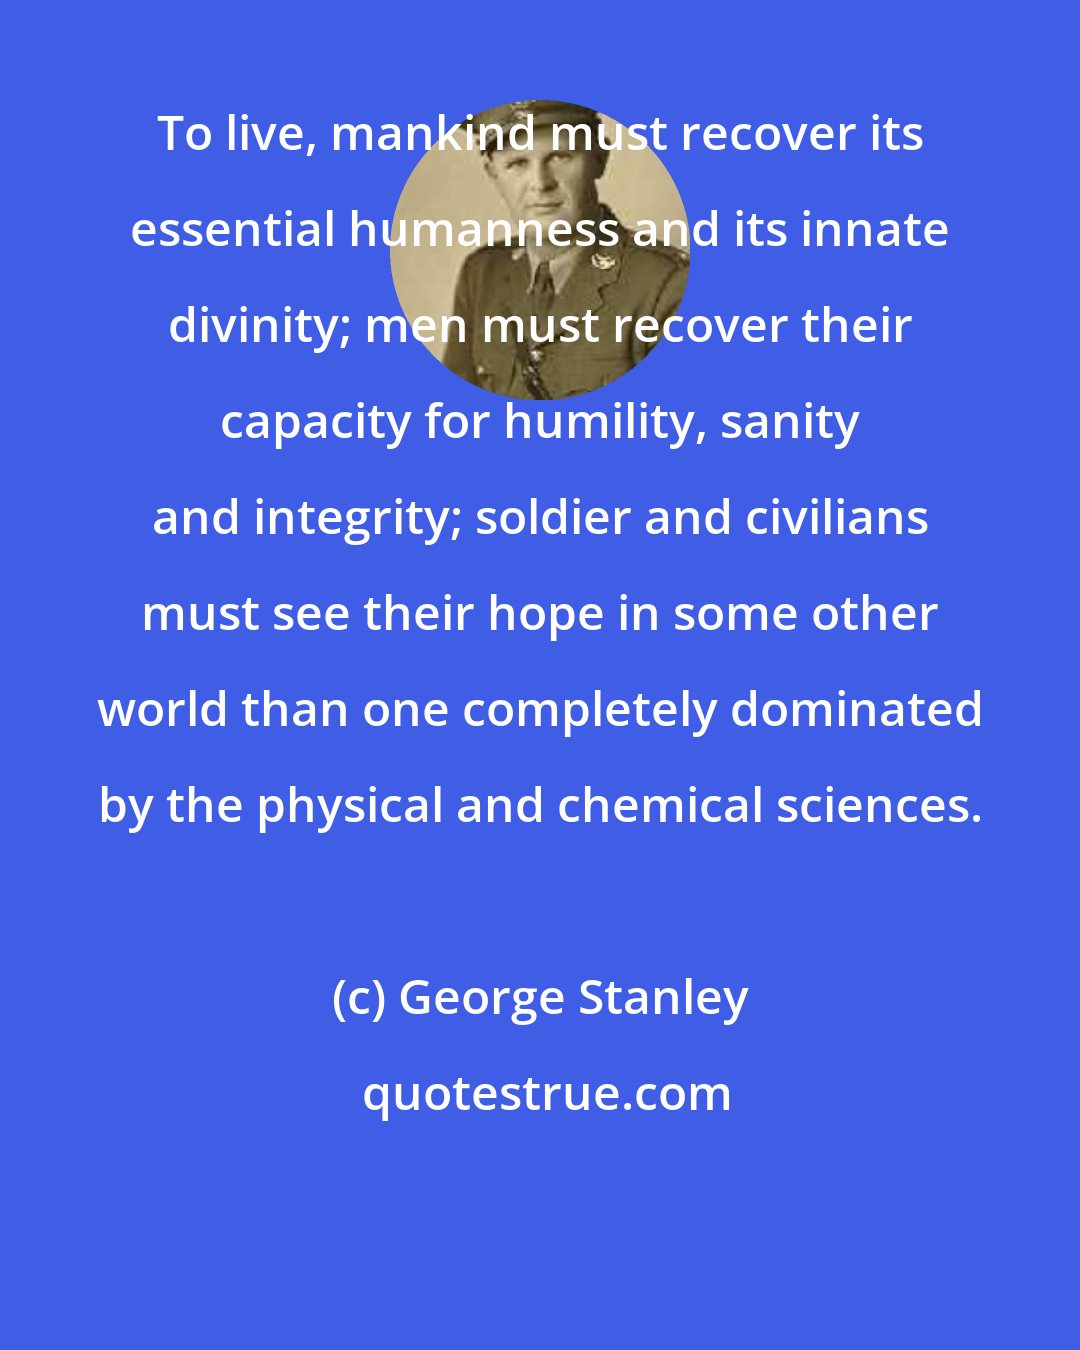 George Stanley: To live, mankind must recover its essential humanness and its innate divinity; men must recover their capacity for humility, sanity and integrity; soldier and civilians must see their hope in some other world than one completely dominated by the physical and chemical sciences.